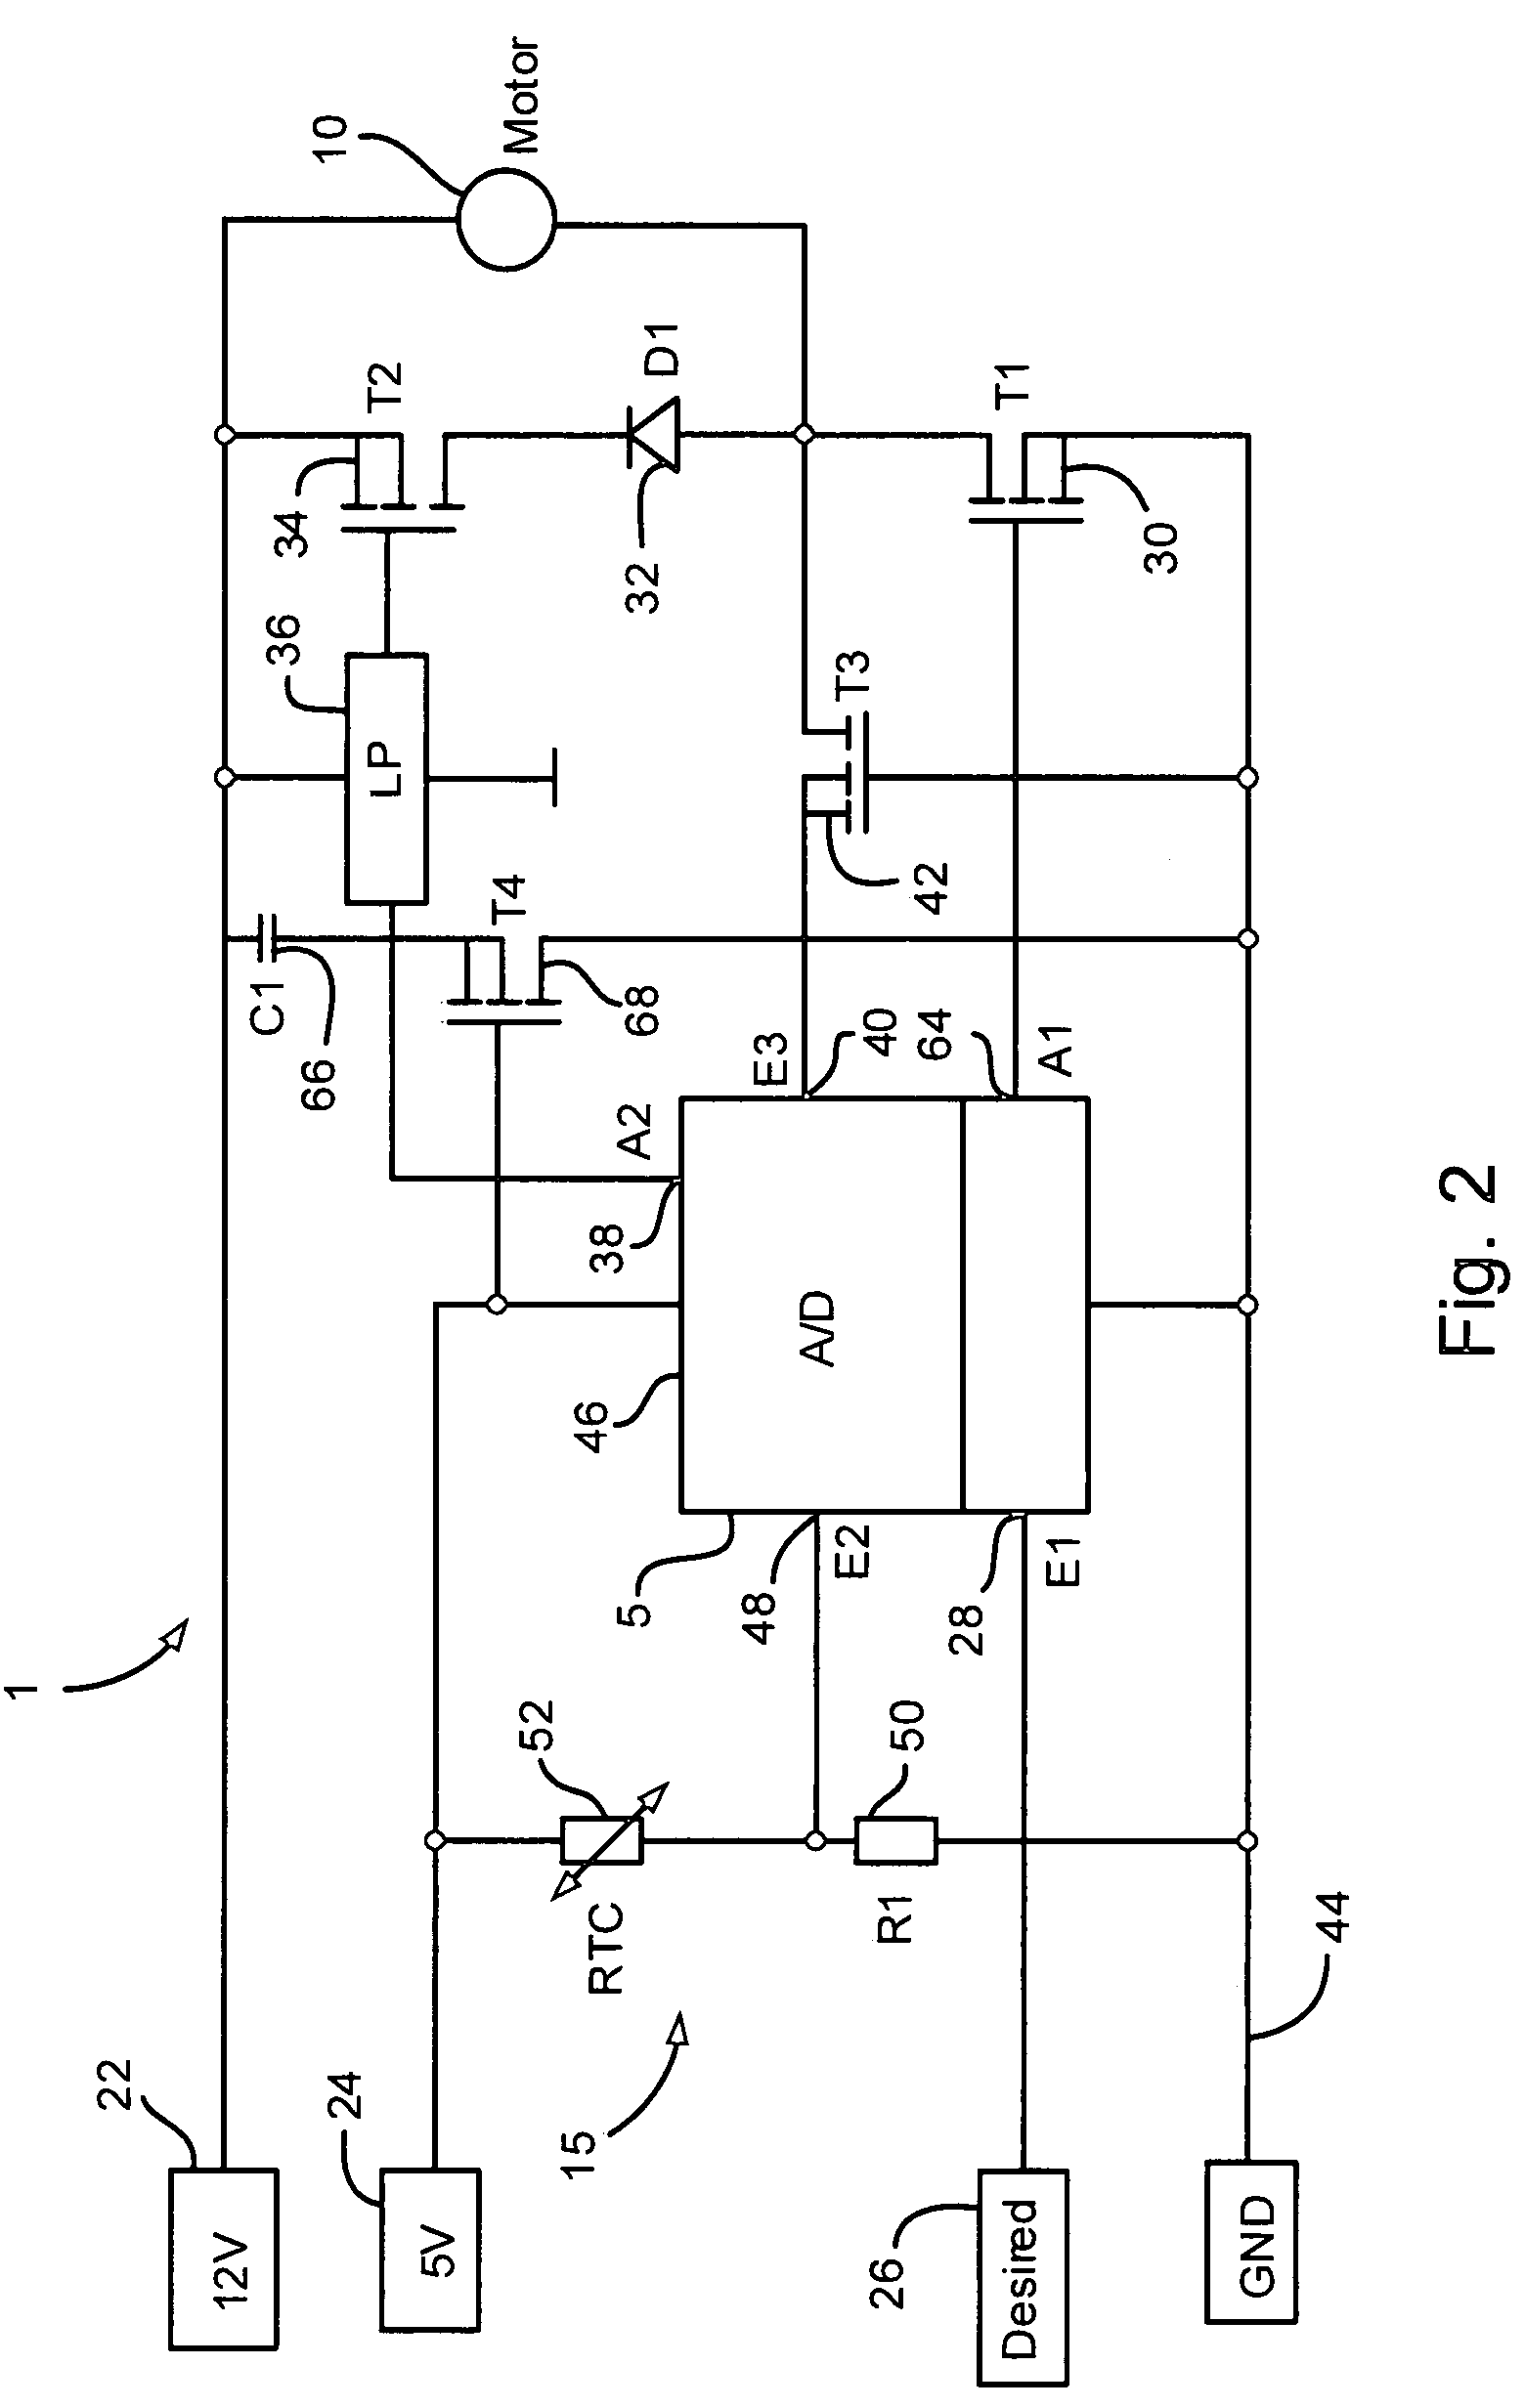 Motor control system for the PWM control of an electric motor